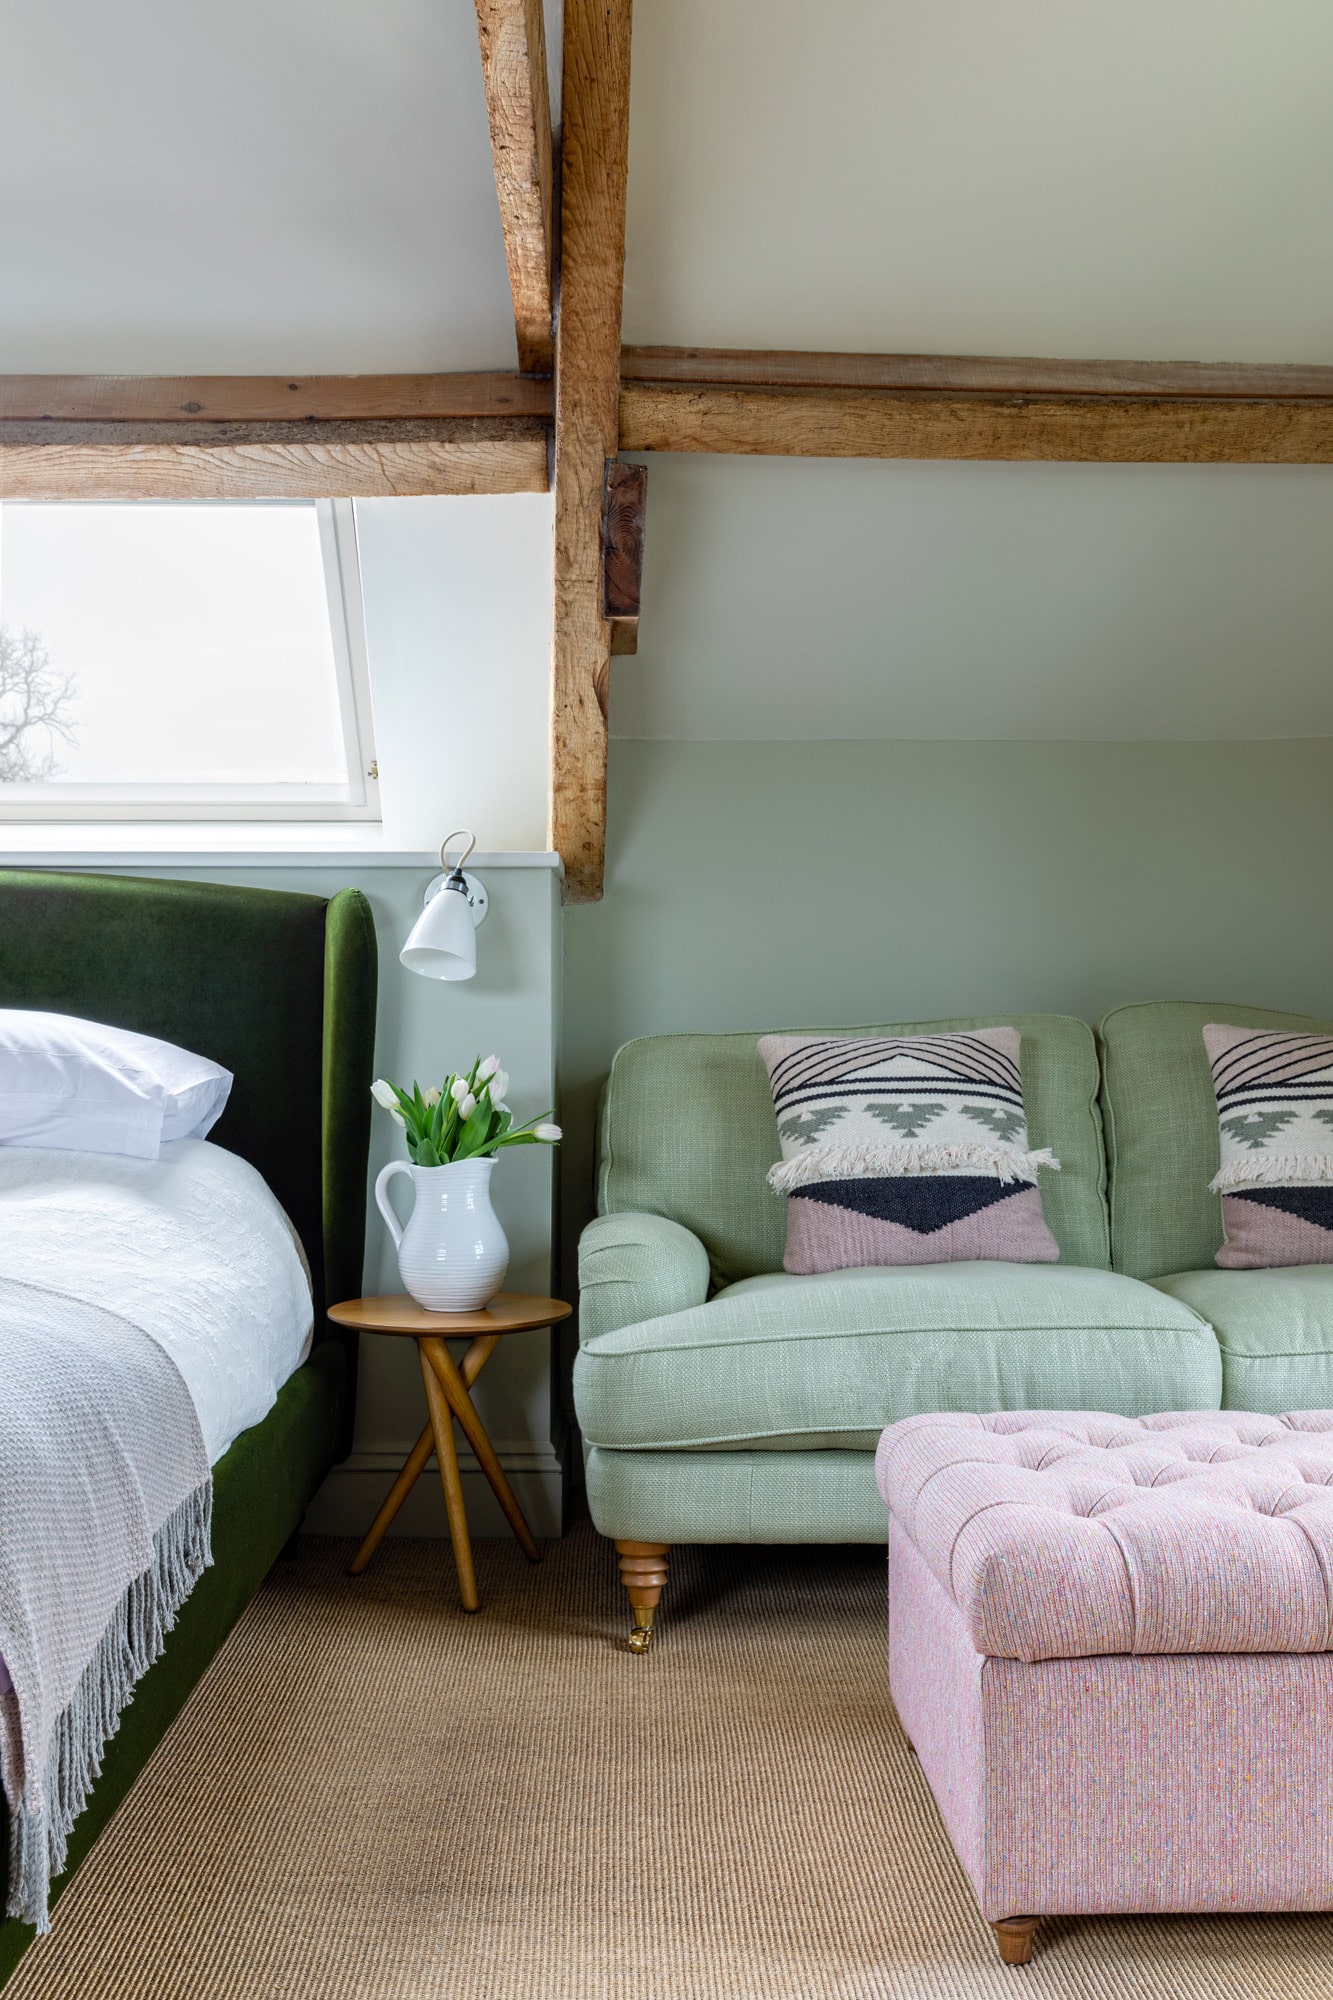 renovated barn bedroom: olive green walls; dark green velvet bed with white linen; bedside table with a vase of tulips; light green sofa and pink soft stool